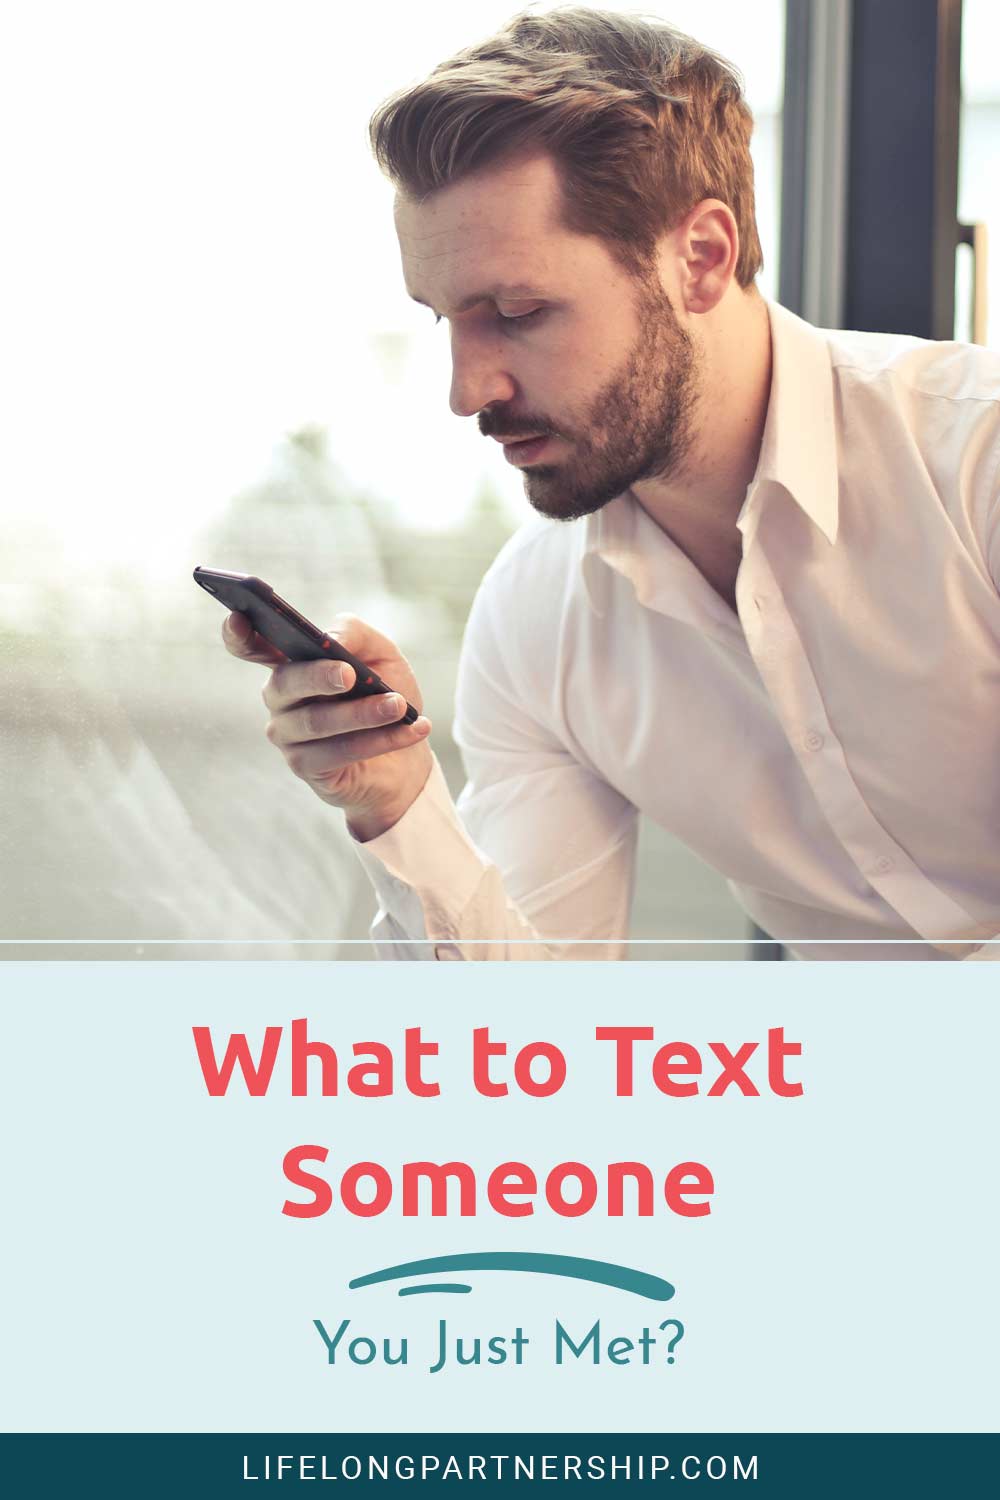 Man in white shirt using phone - What to Text Someone You Just Met?